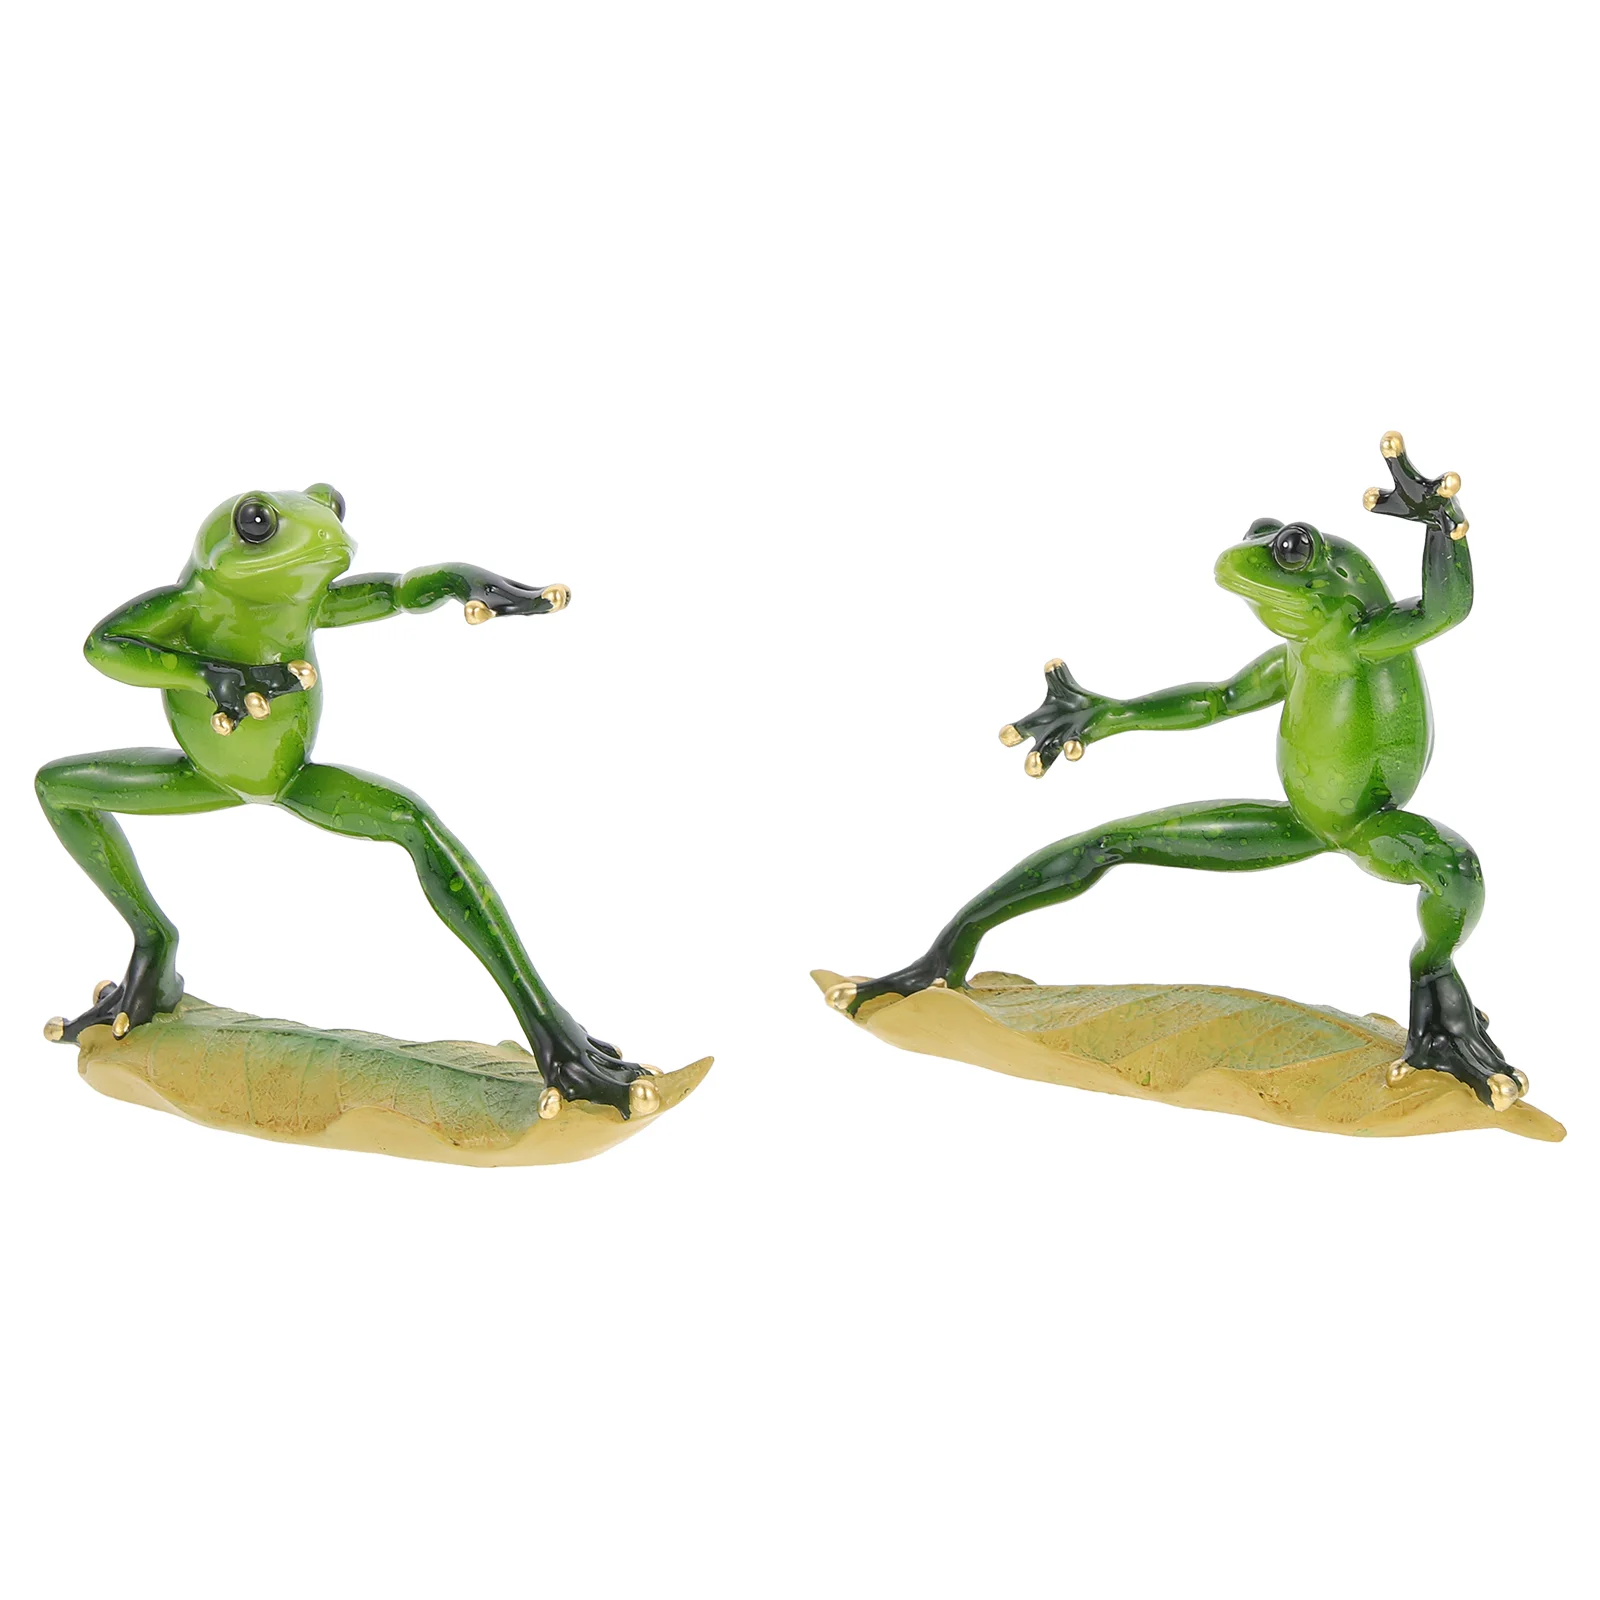 

2pcs Kung Fu Frog-shaped Models Outdoor Frogs Decors Couple Frogs Ornaments